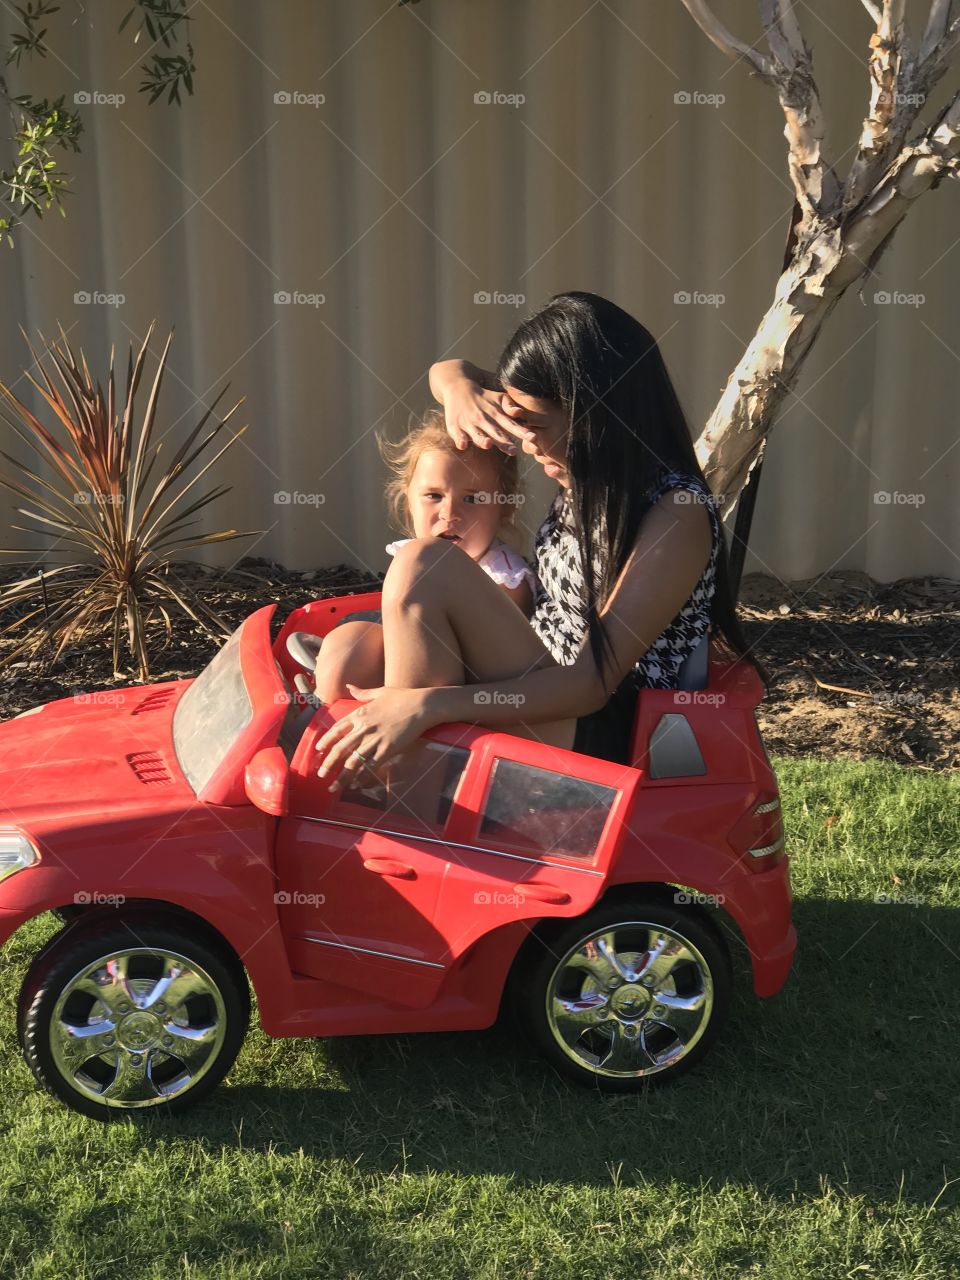 Just having a fun to ride a little one car